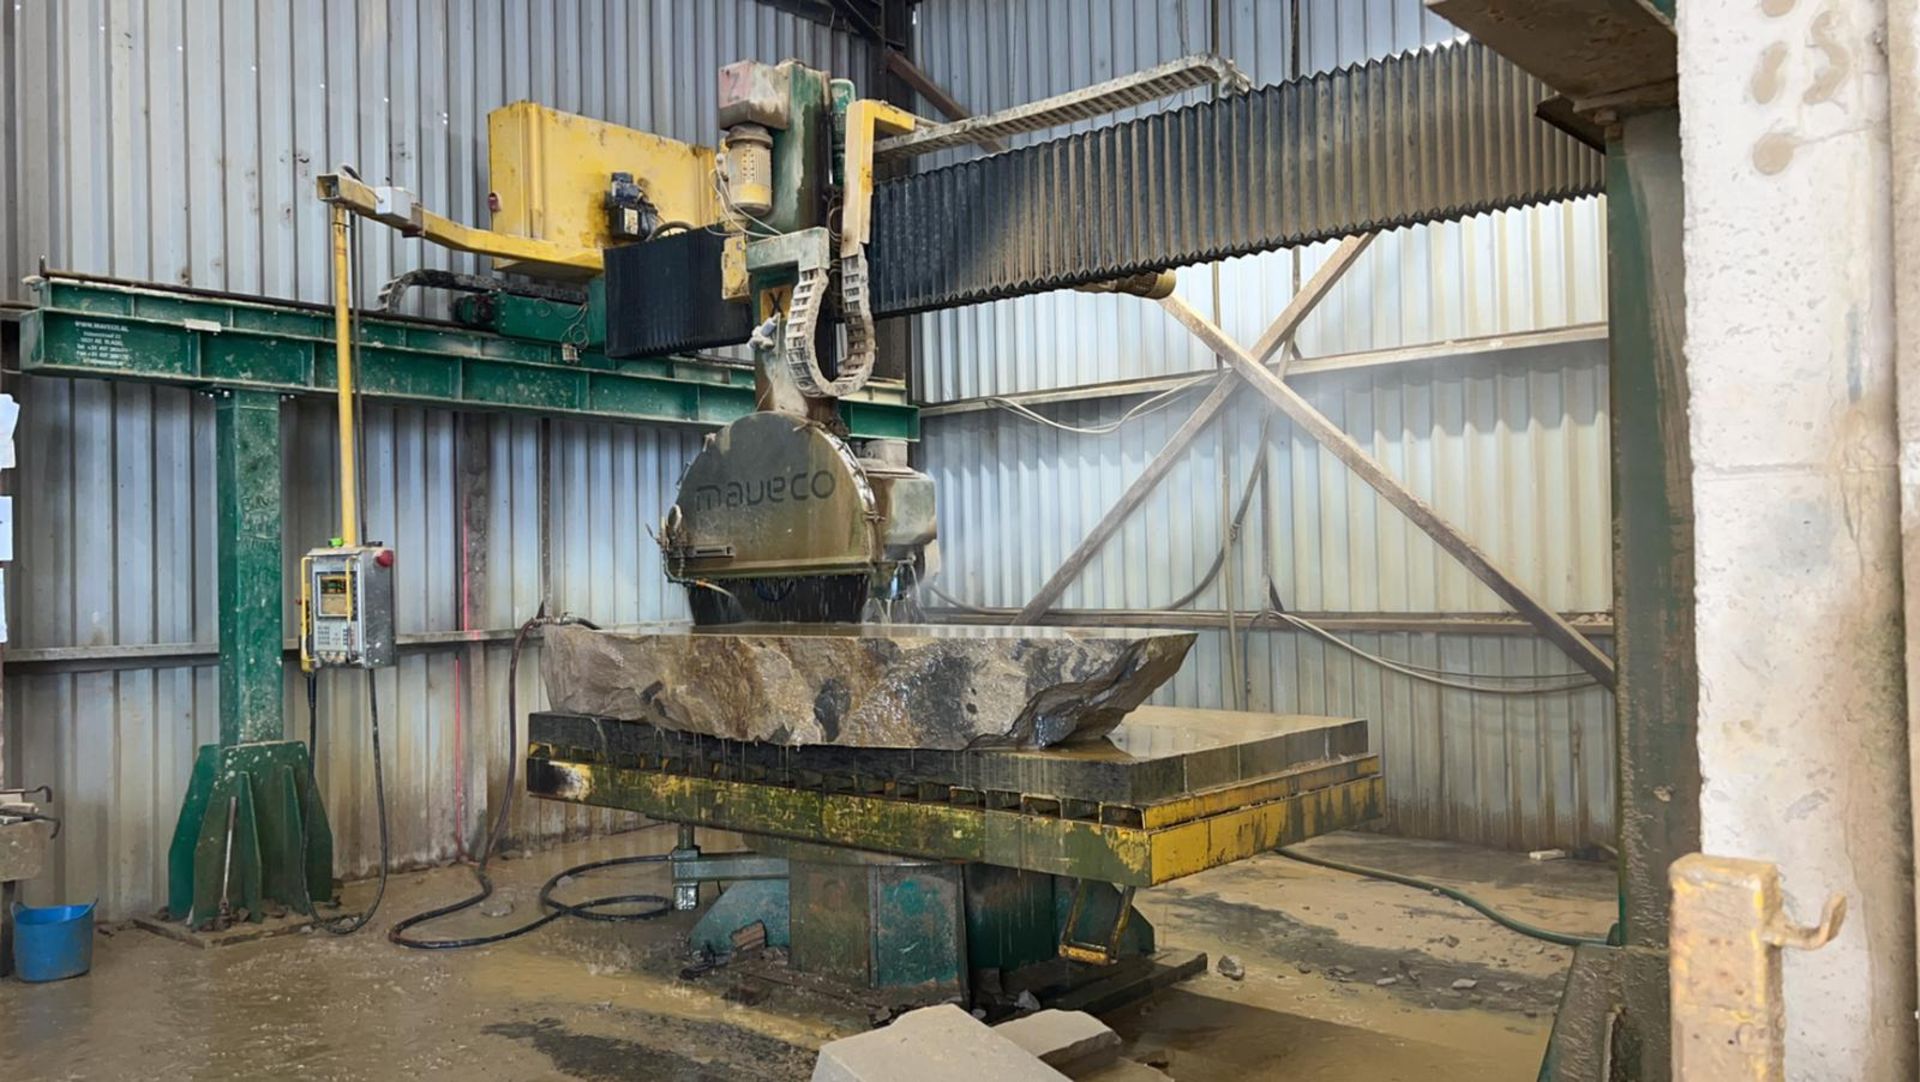 Maveco 1200 automatic Stone Saw Still in use every day Good condition  cuts like new well serviced - Image 5 of 6